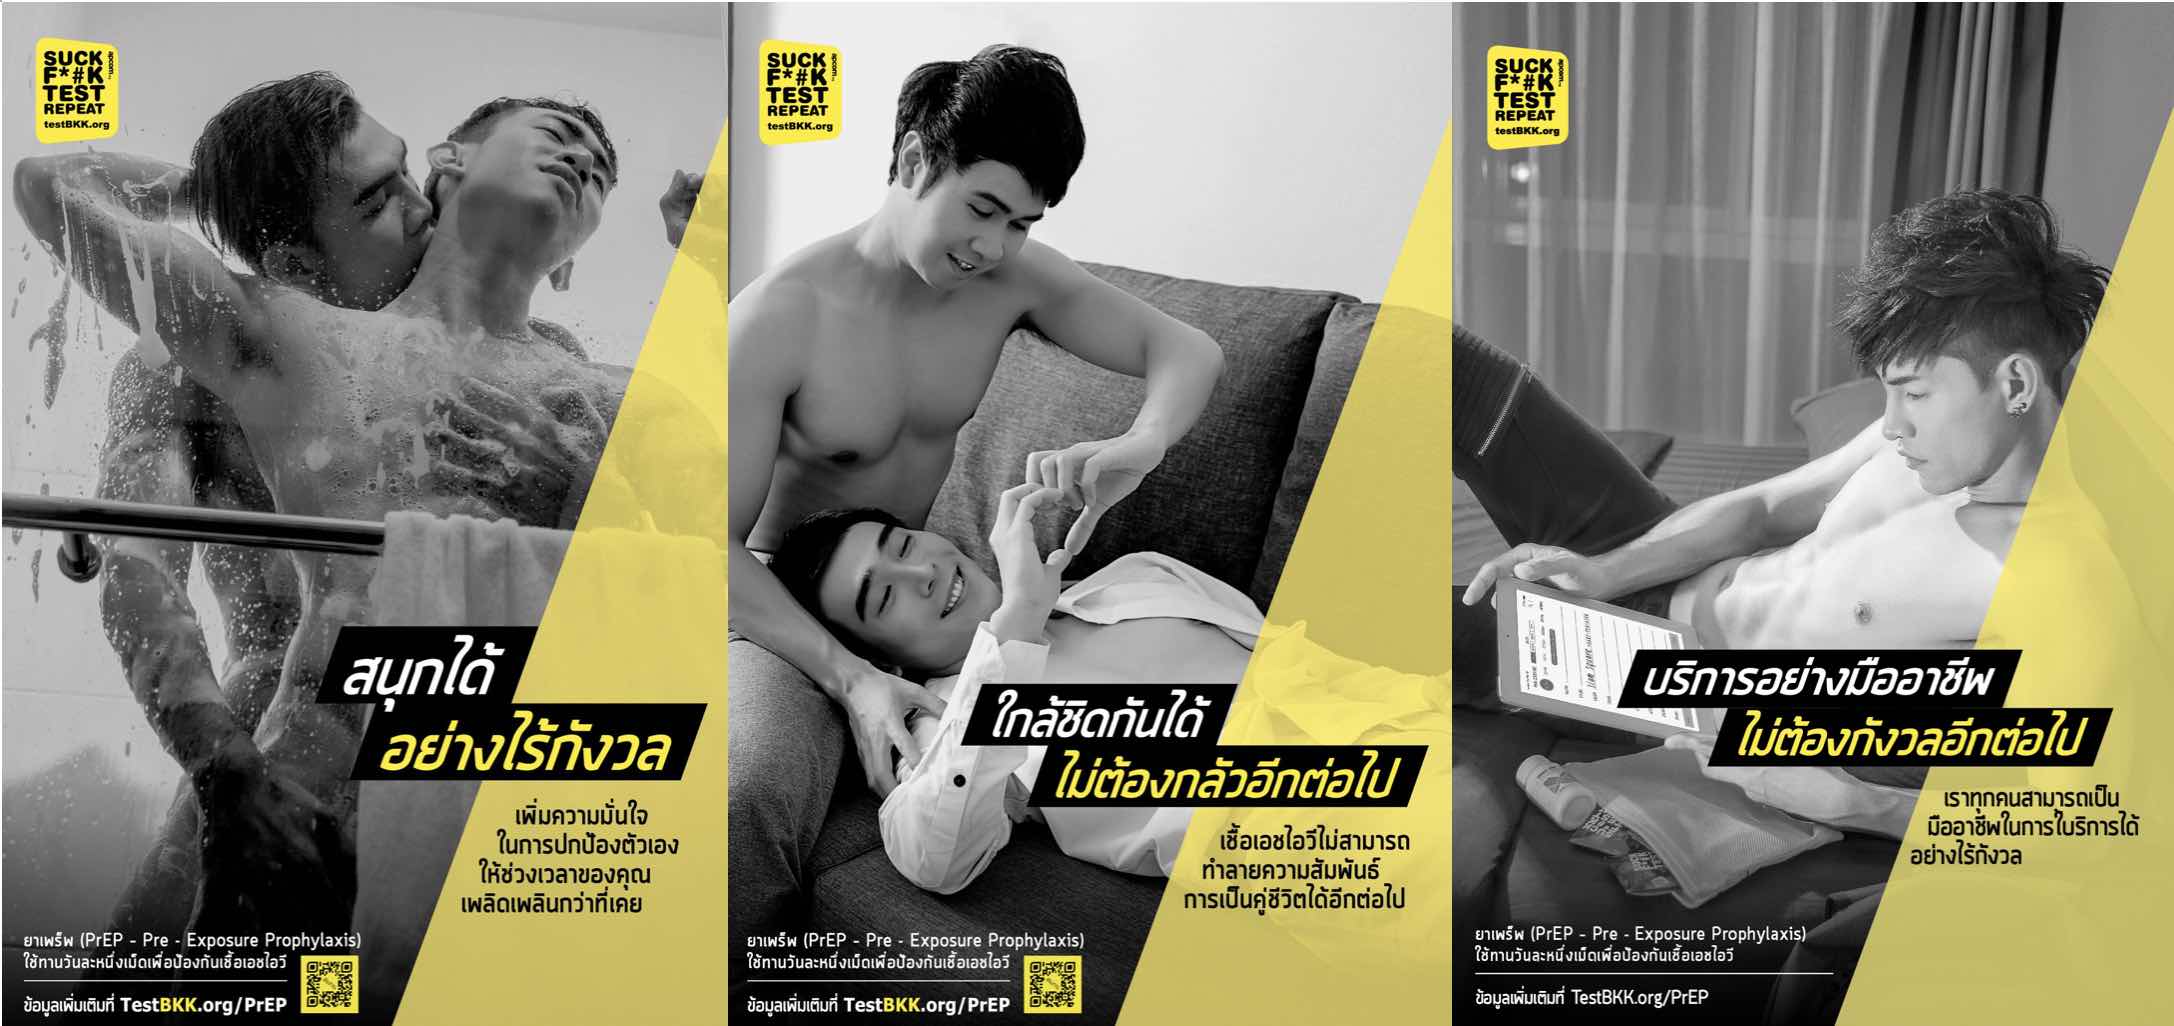 Posters from a TestBKK PrEP campaign. On the left, two men showering together, with text reading “Have fun without fear.” In the center, two men are on a couch together, making a heart sign with their hands. It reads, “Get close together, without fear anymore.” On the right, a shirtless man on the couch with an ipad, with text that reads “Offering professional services, don’t need to fear anymore.” Photo Credit: TestBKK APCOM Foundation.